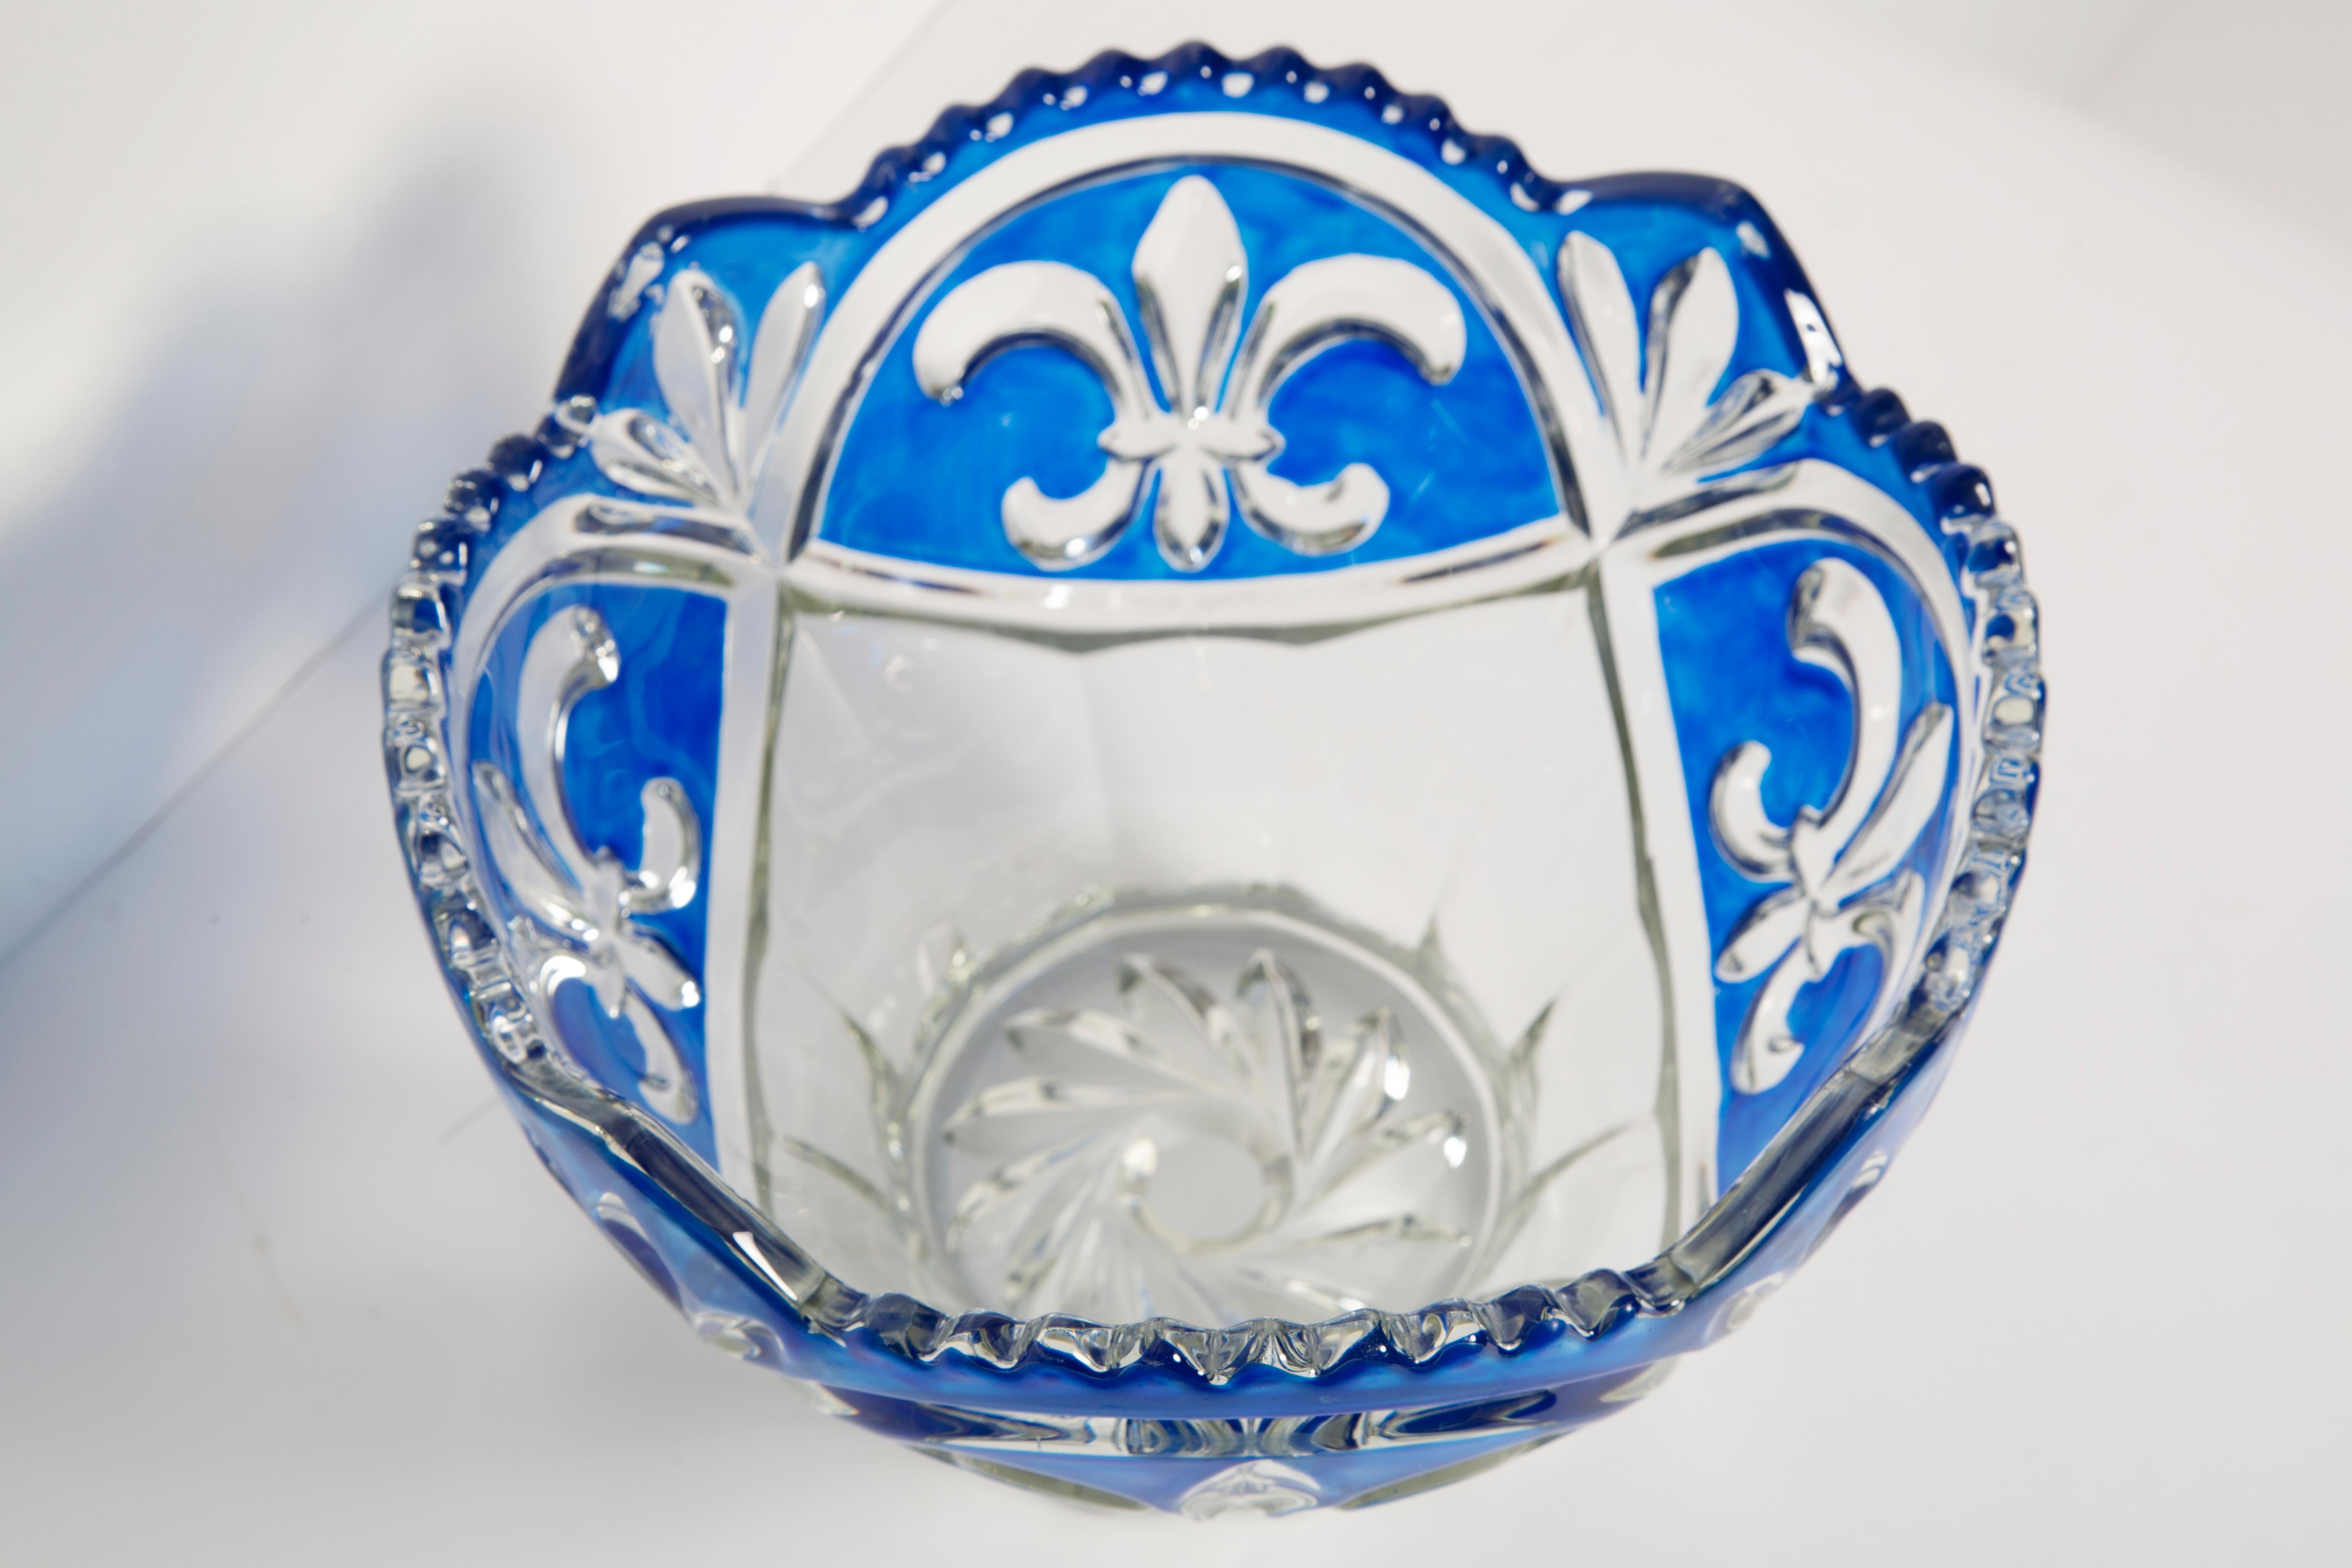 Italian Vintage Blue Decorative Crystal Glass Plate, Italy, 1960s For Sale